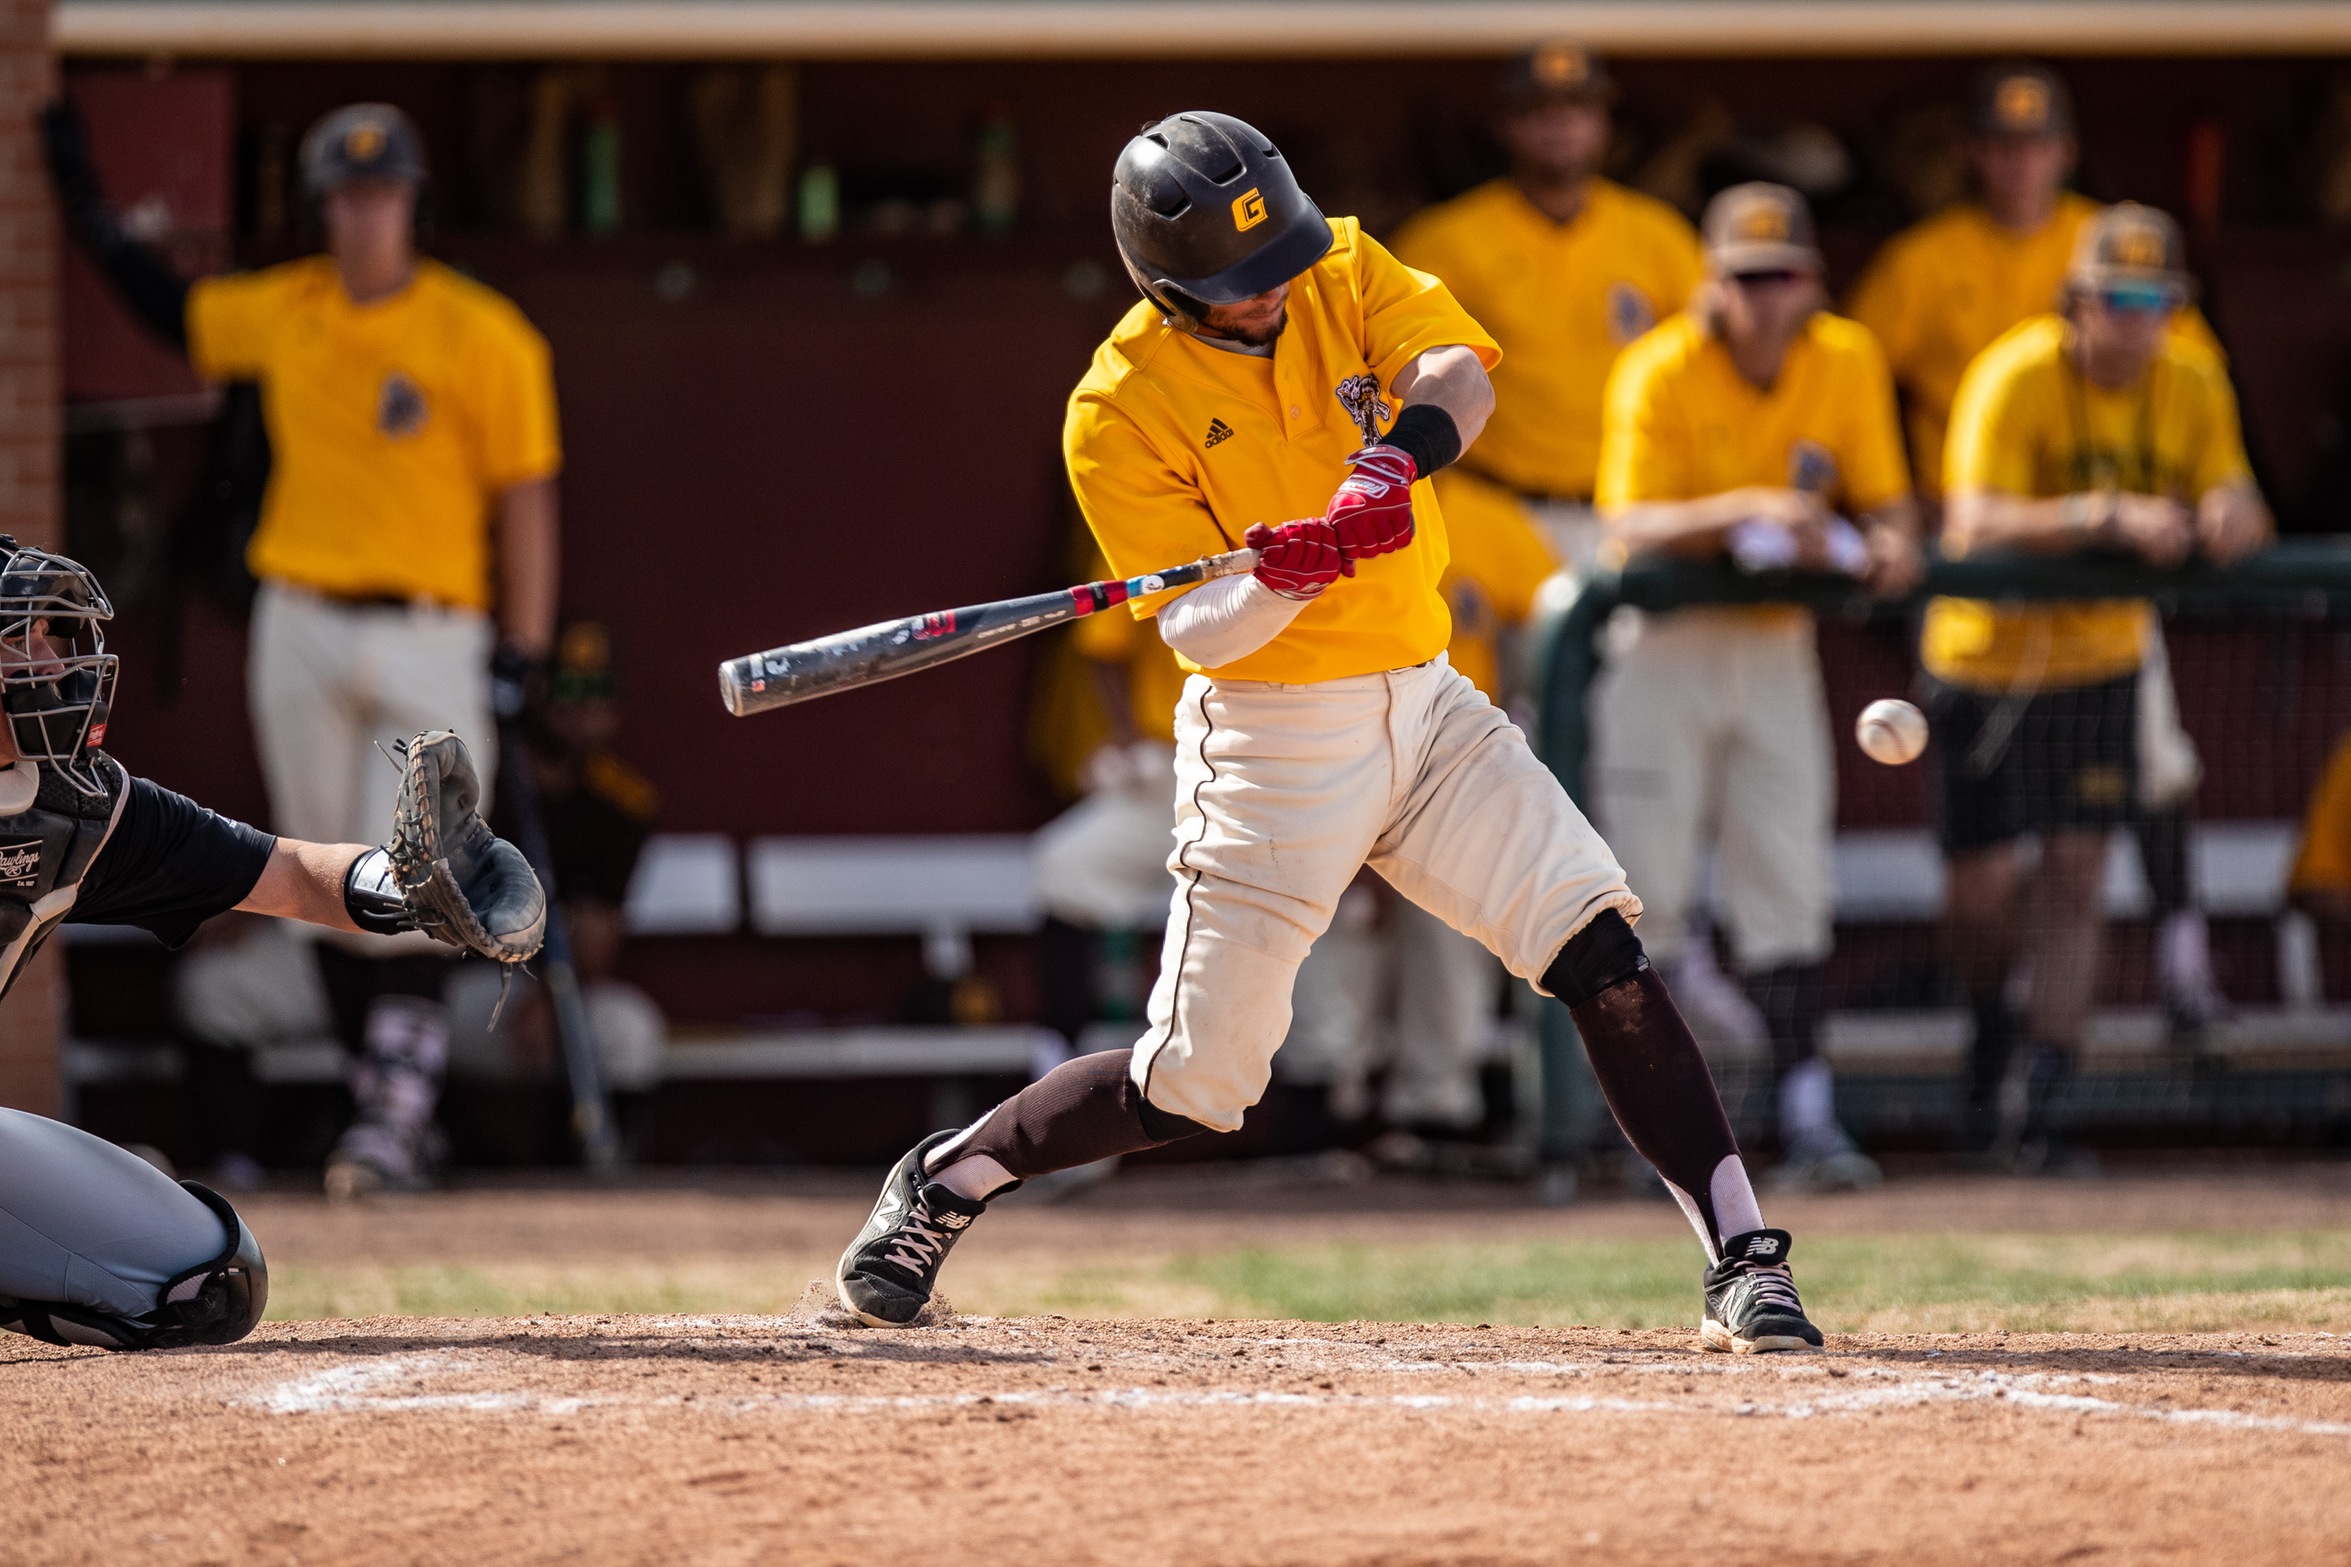 Big inning dooms Broncbusters in game-three loss